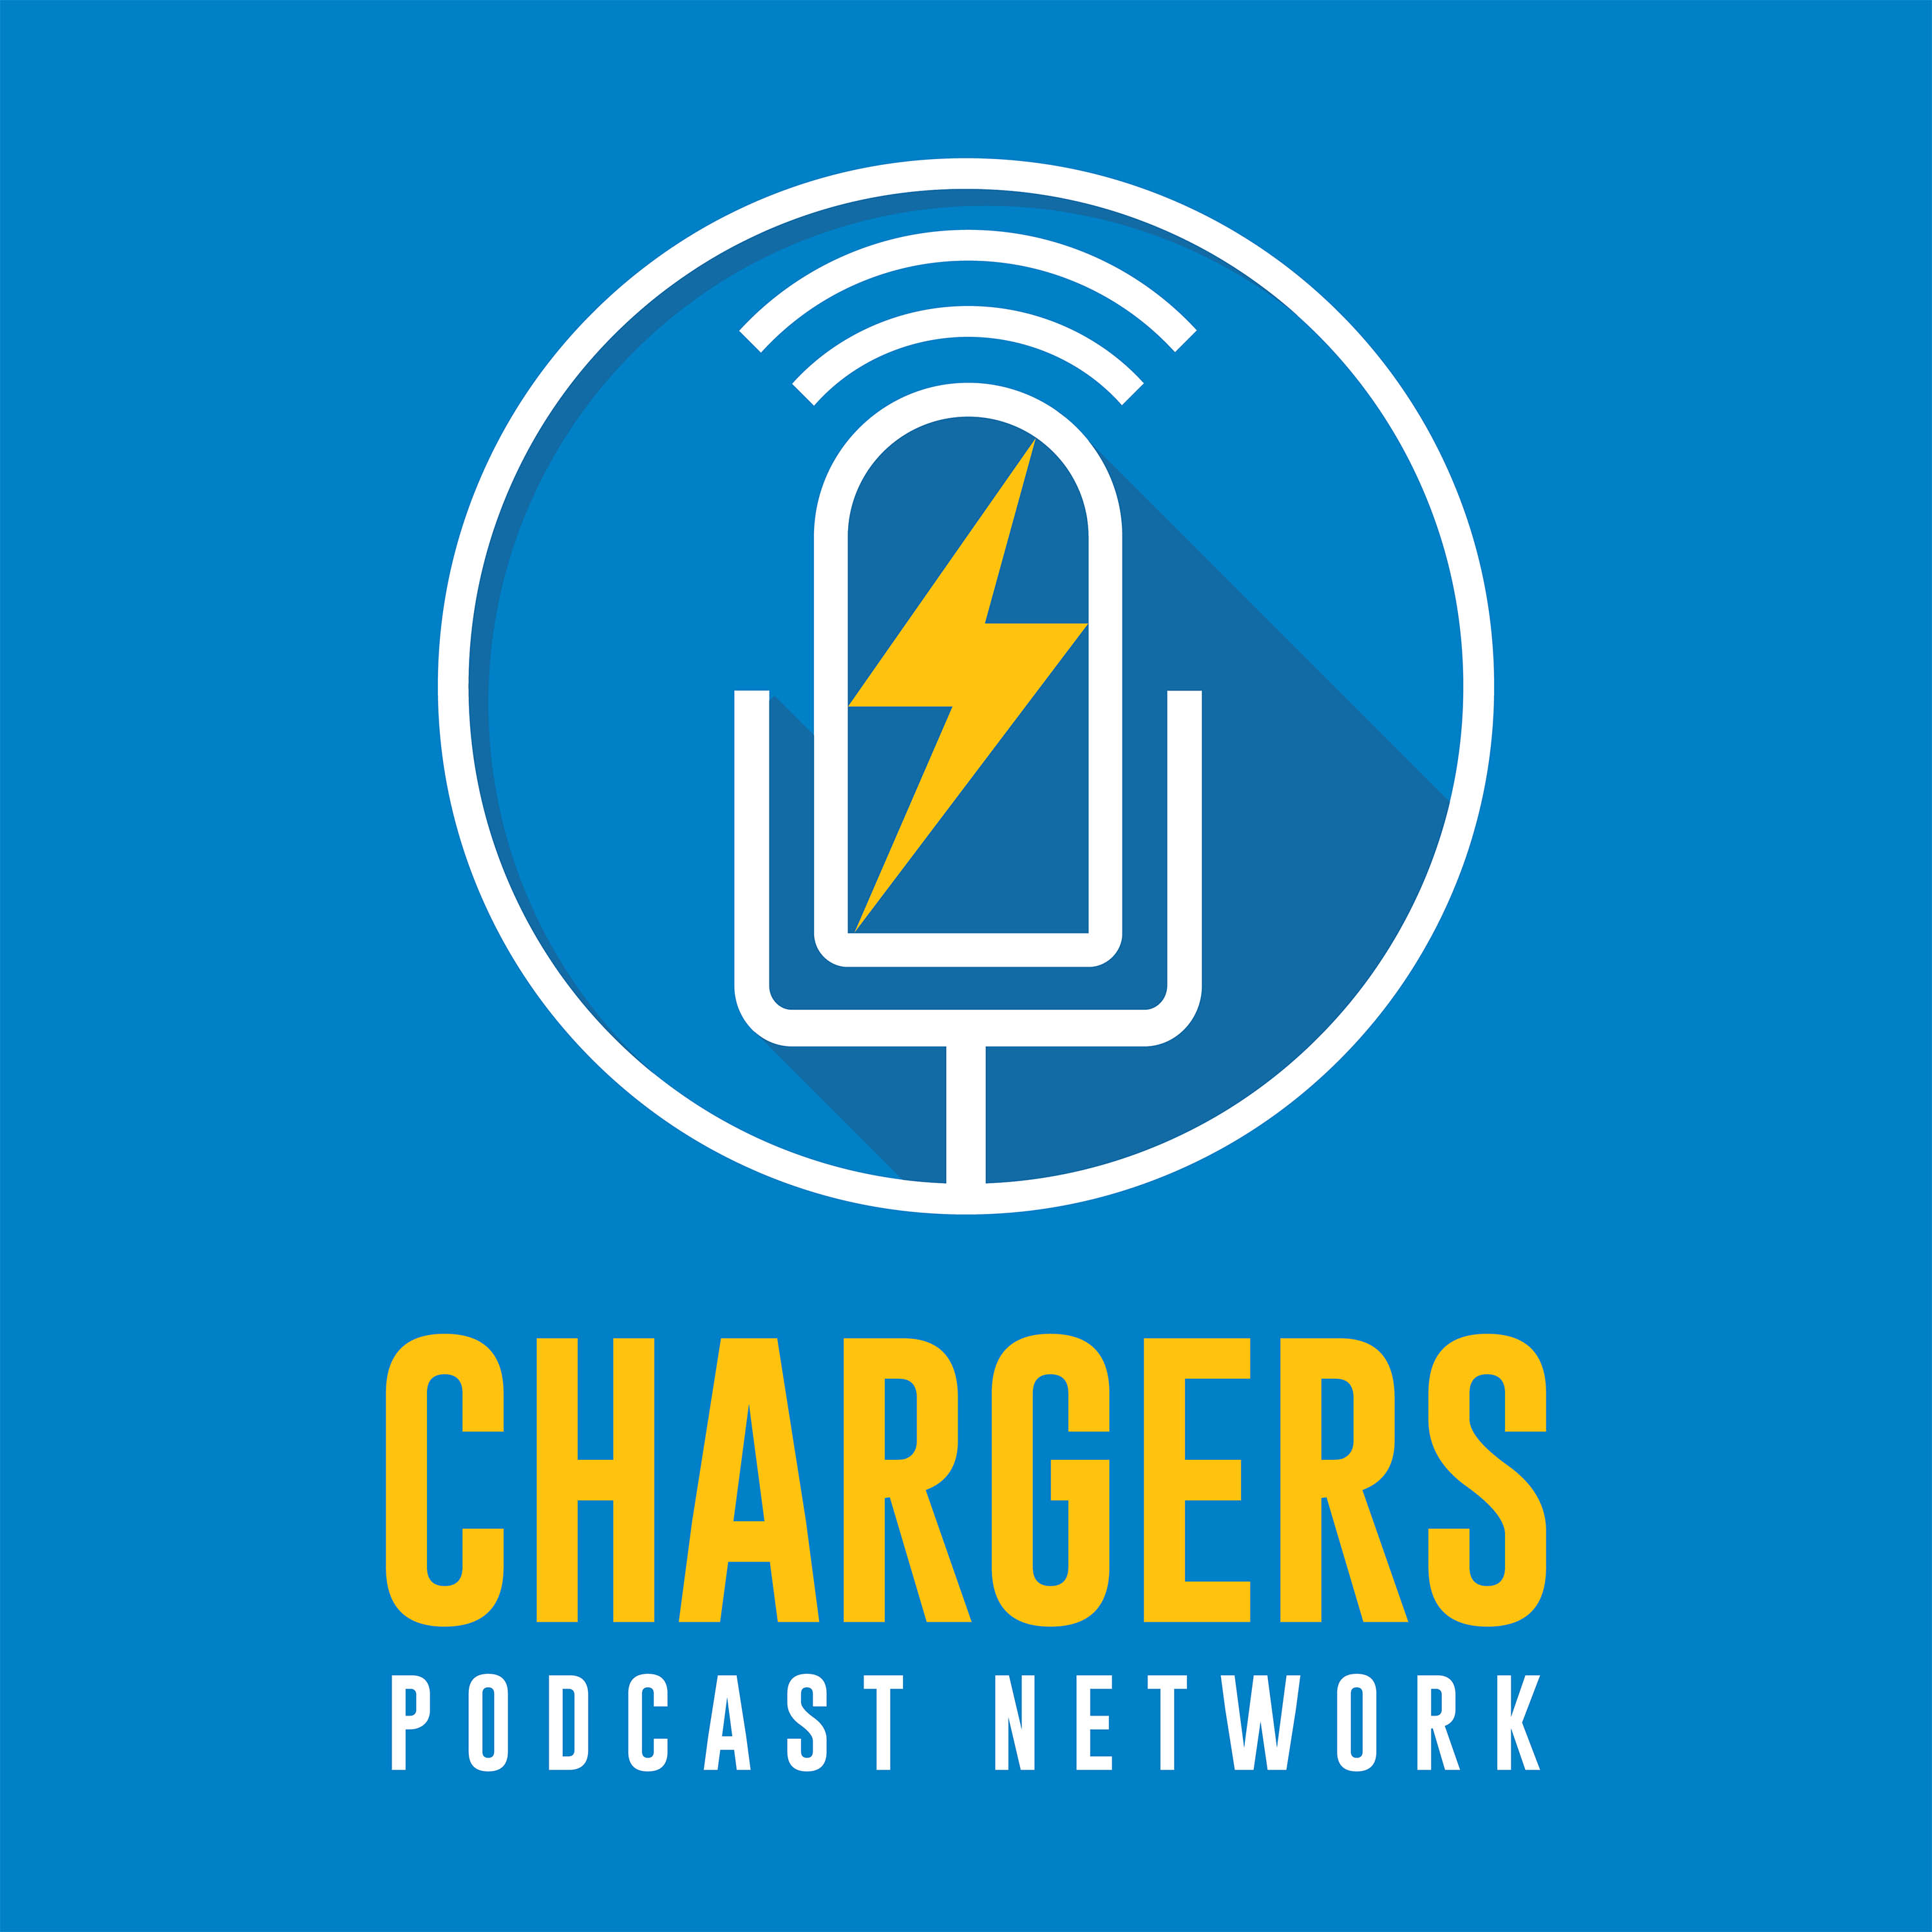 Chargers Weekly Podcast: Mary Kay Cabot, Matt "Money" Smith, Ashley Brewer and Marcas Grant